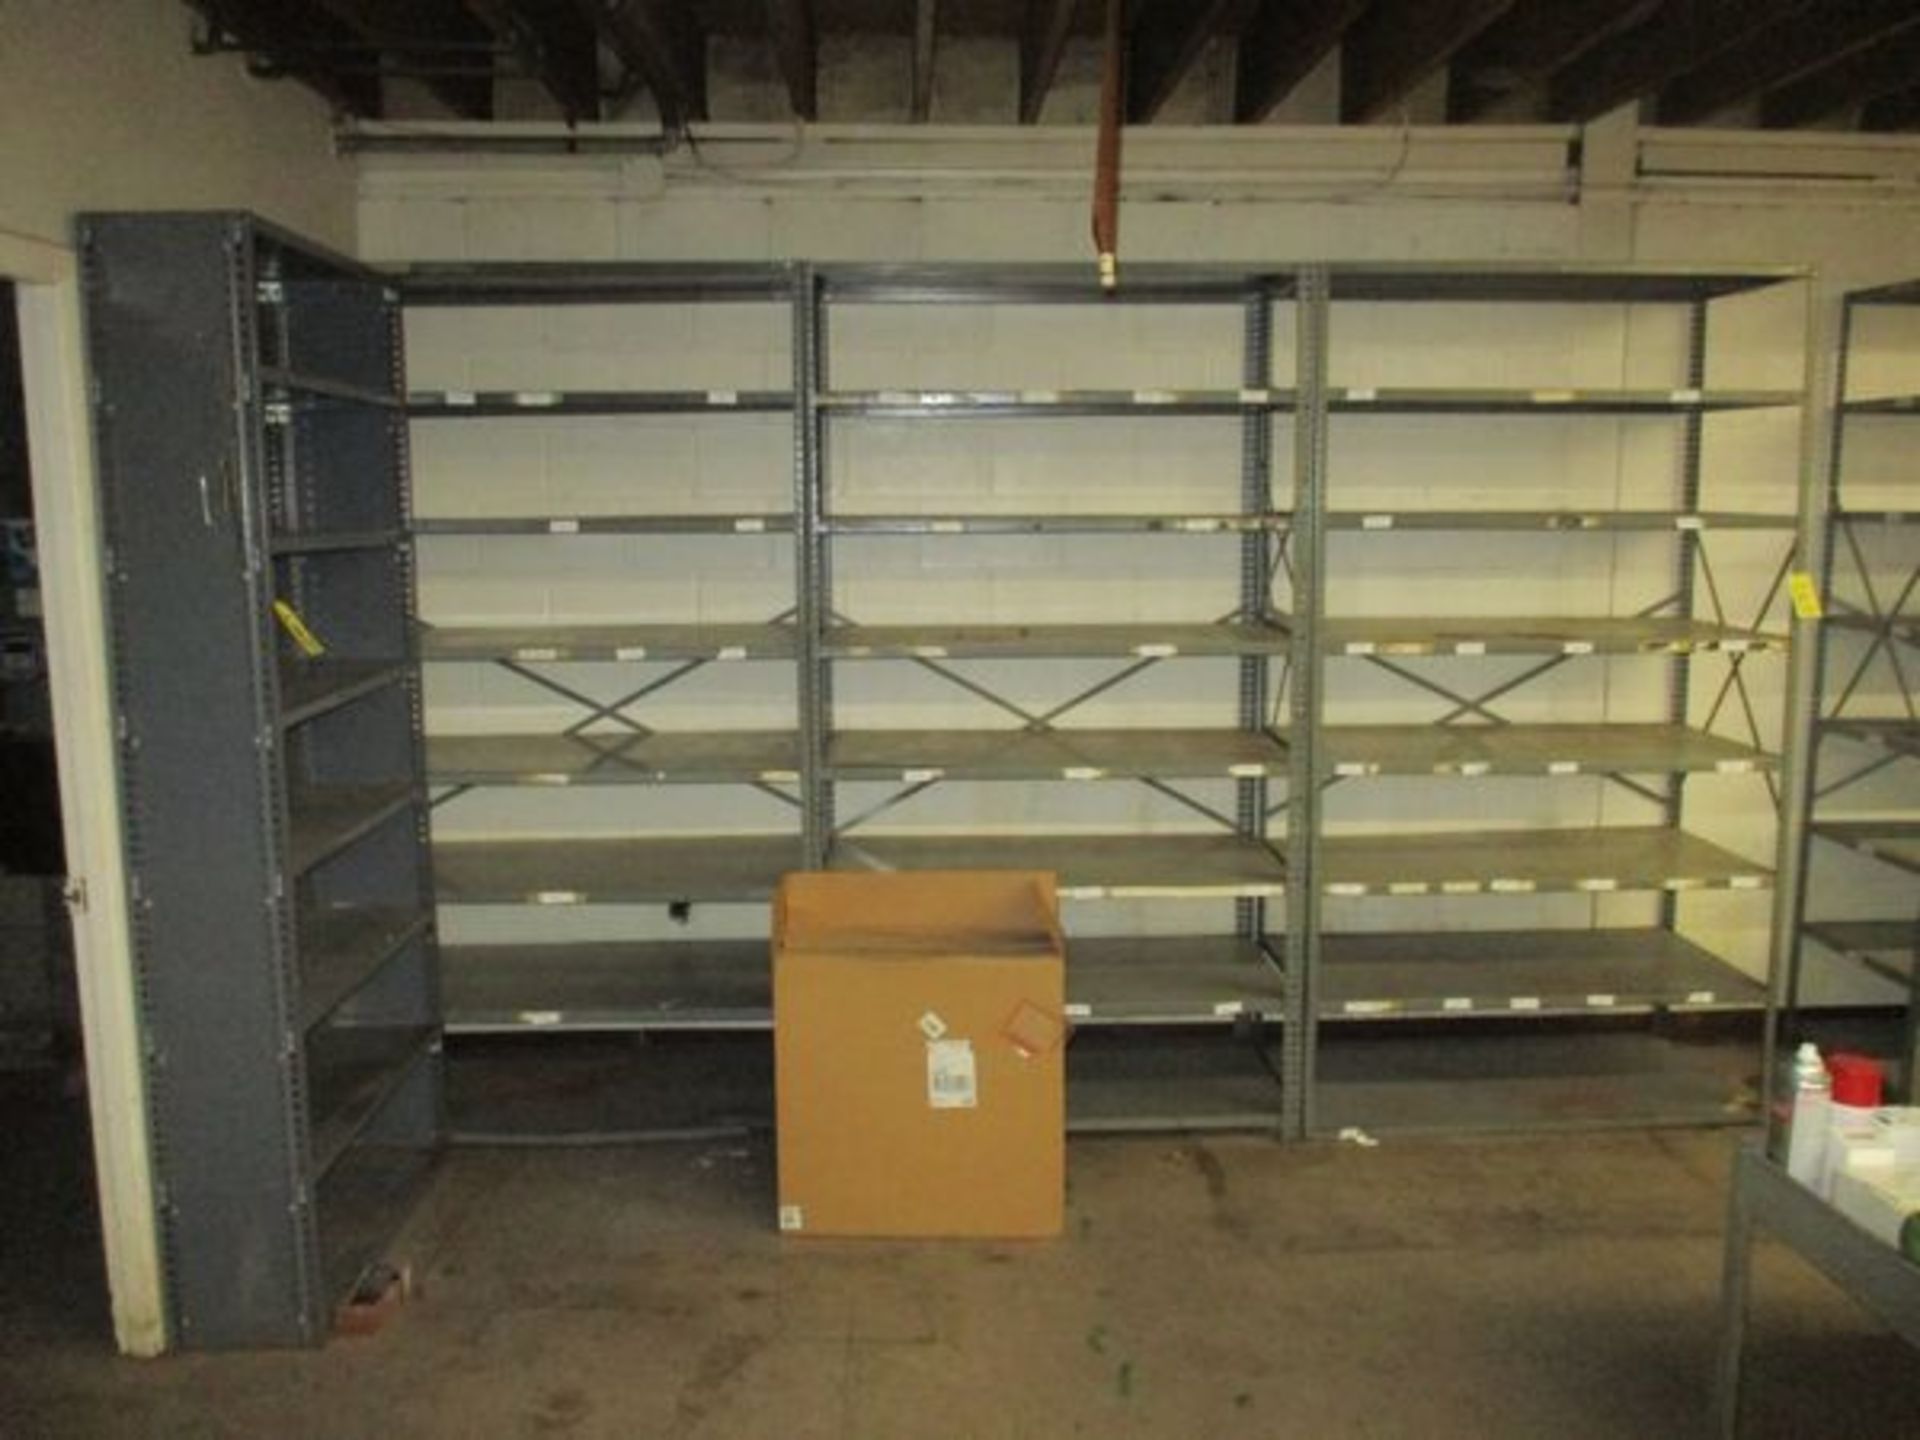 LOT (8) Sections of Shelving, (2) Desks, (2) Chairs, Refrigerator, Bookcase